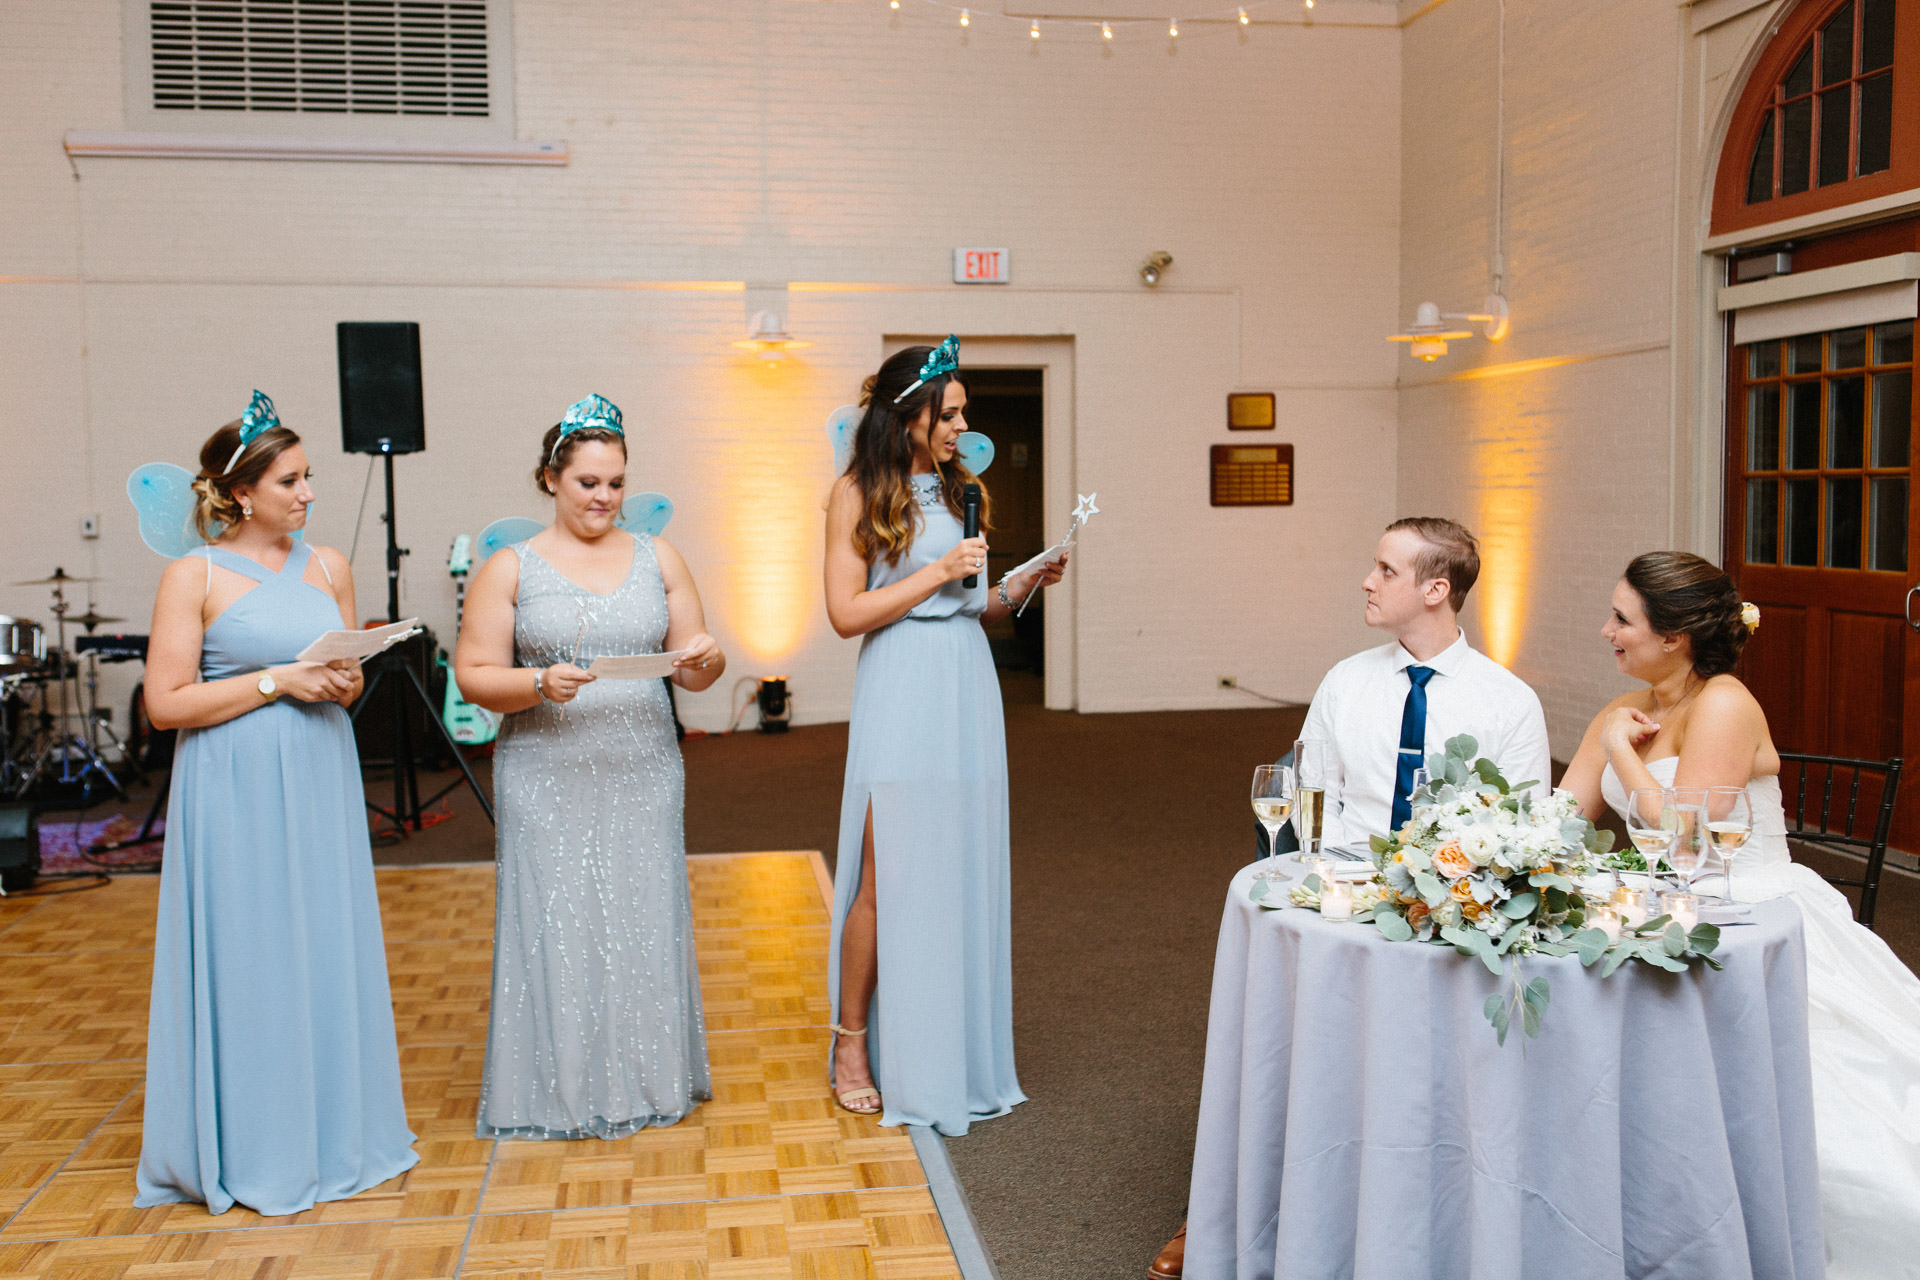 Maid of honor delivering her speech during the reception